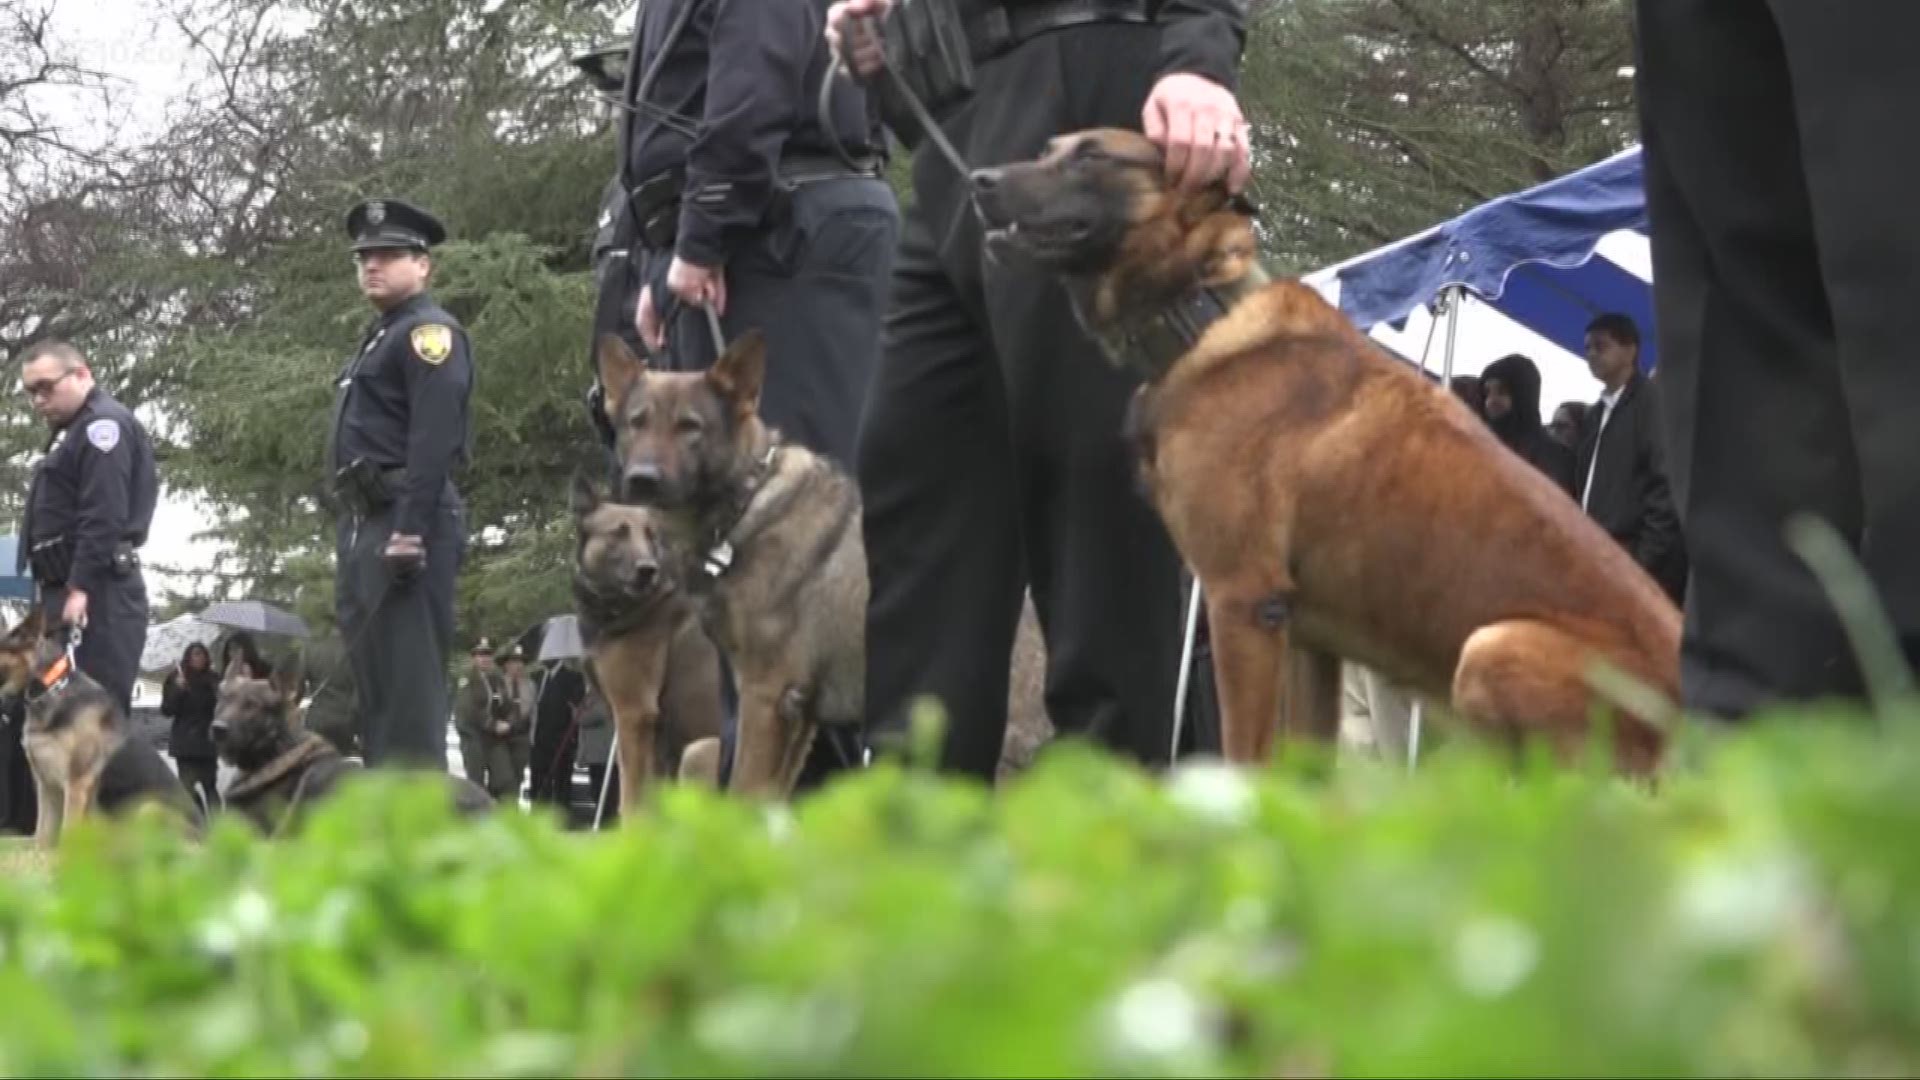 As rain fell on much of California, hundreds of officers, on two legs and four, arrived in Modesto to honor the man who many are calling a true American hero. Among them, the K9 partner of the late Newman Police Cpl. Ronil Singh.